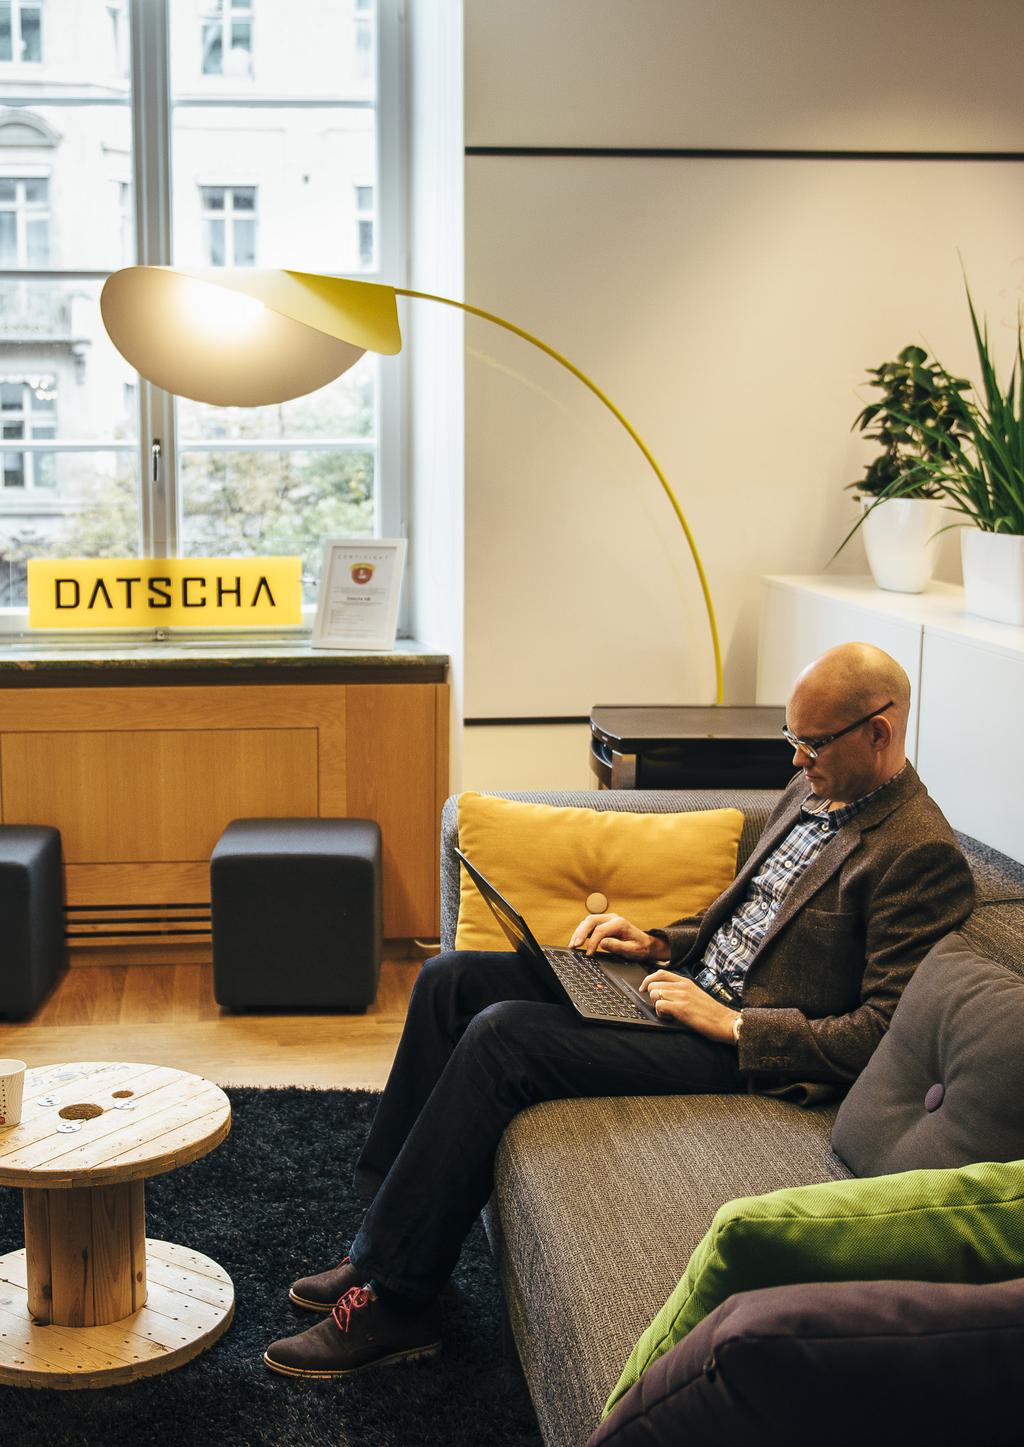 ABOUT DATSCHA Since 1996, Datscha has been developing award -winning technology to collect, aggregate and visualise public and proprietary real estate data in Sweden, Finland and the United Kingdom